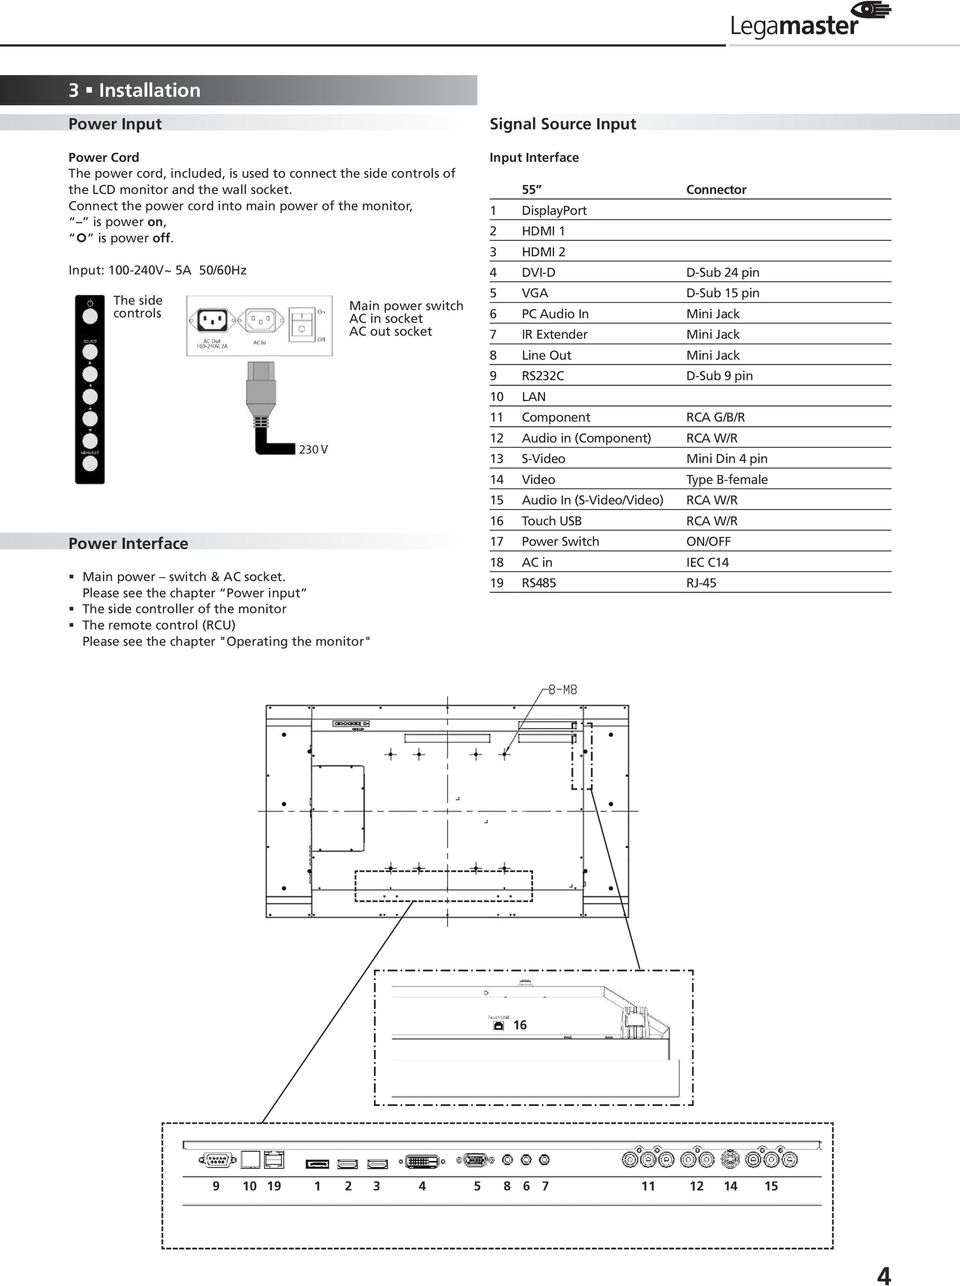 Please see the chapter Power input The side controller of the monitor The remote control (RCU) Please see the chapter "Operating the monitor" Main power switch AC in socket AC out socket Signal